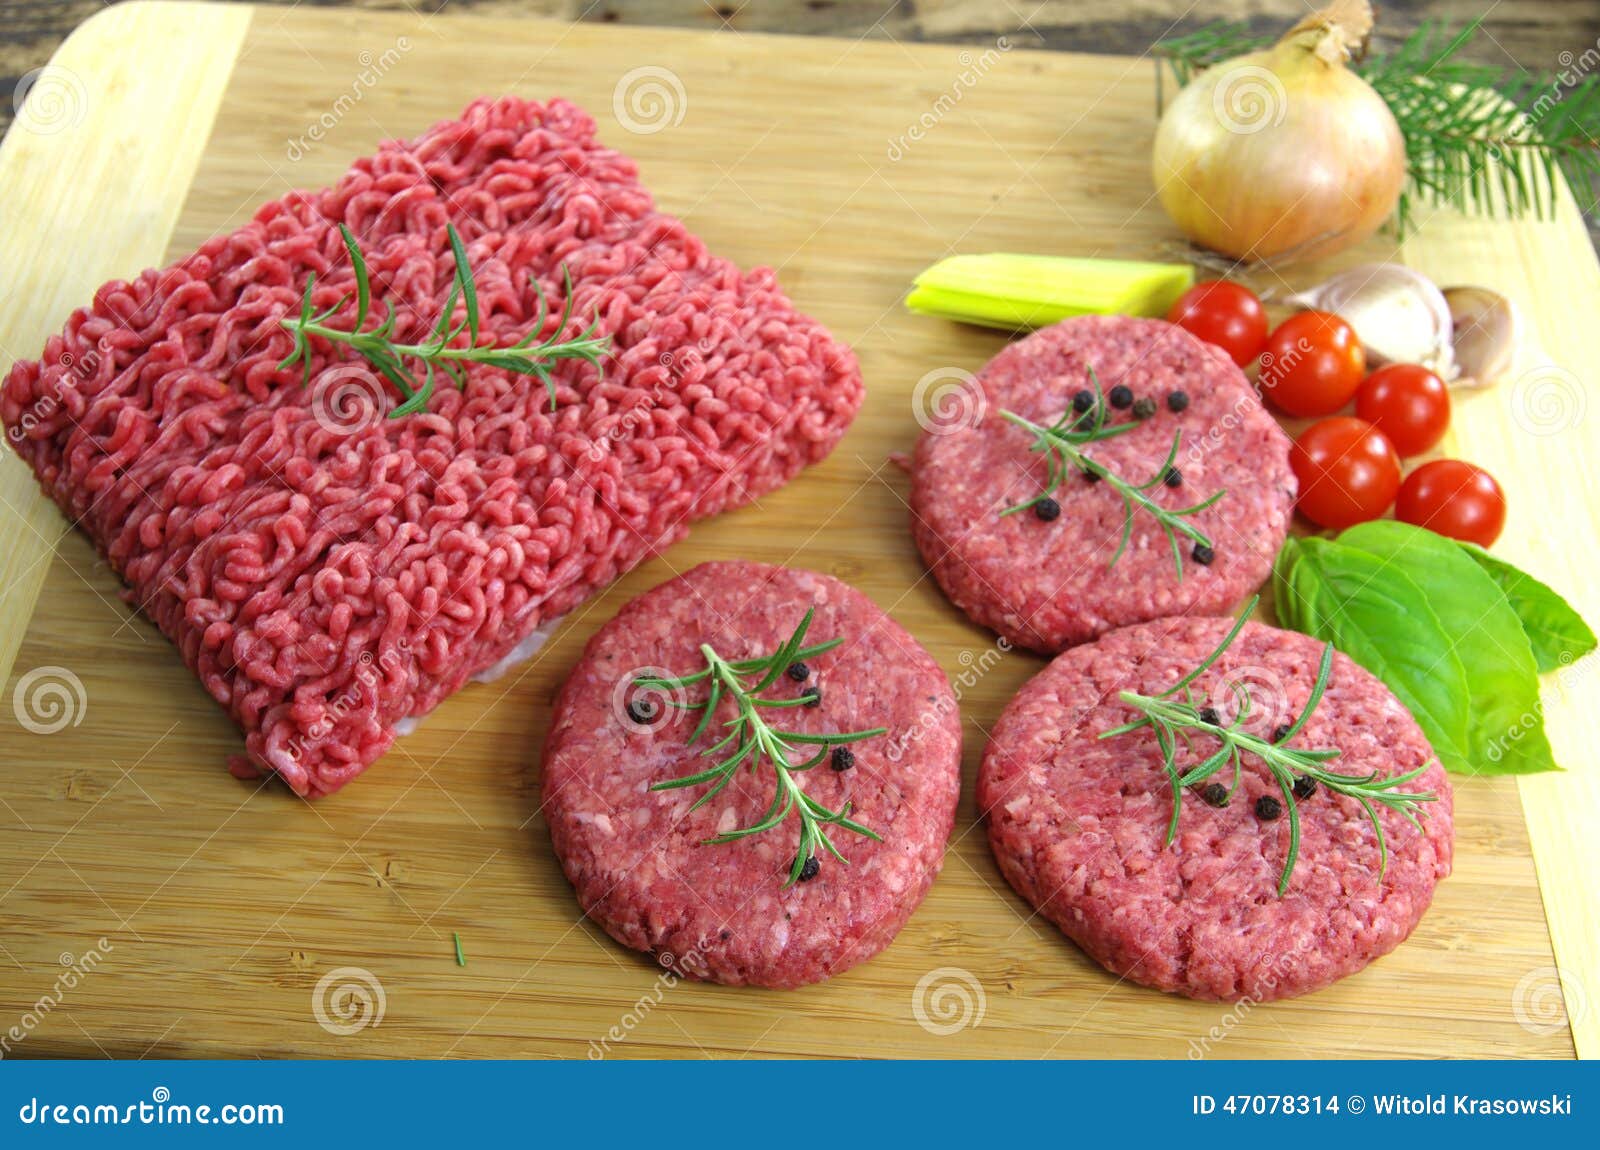 raw minced beef meat